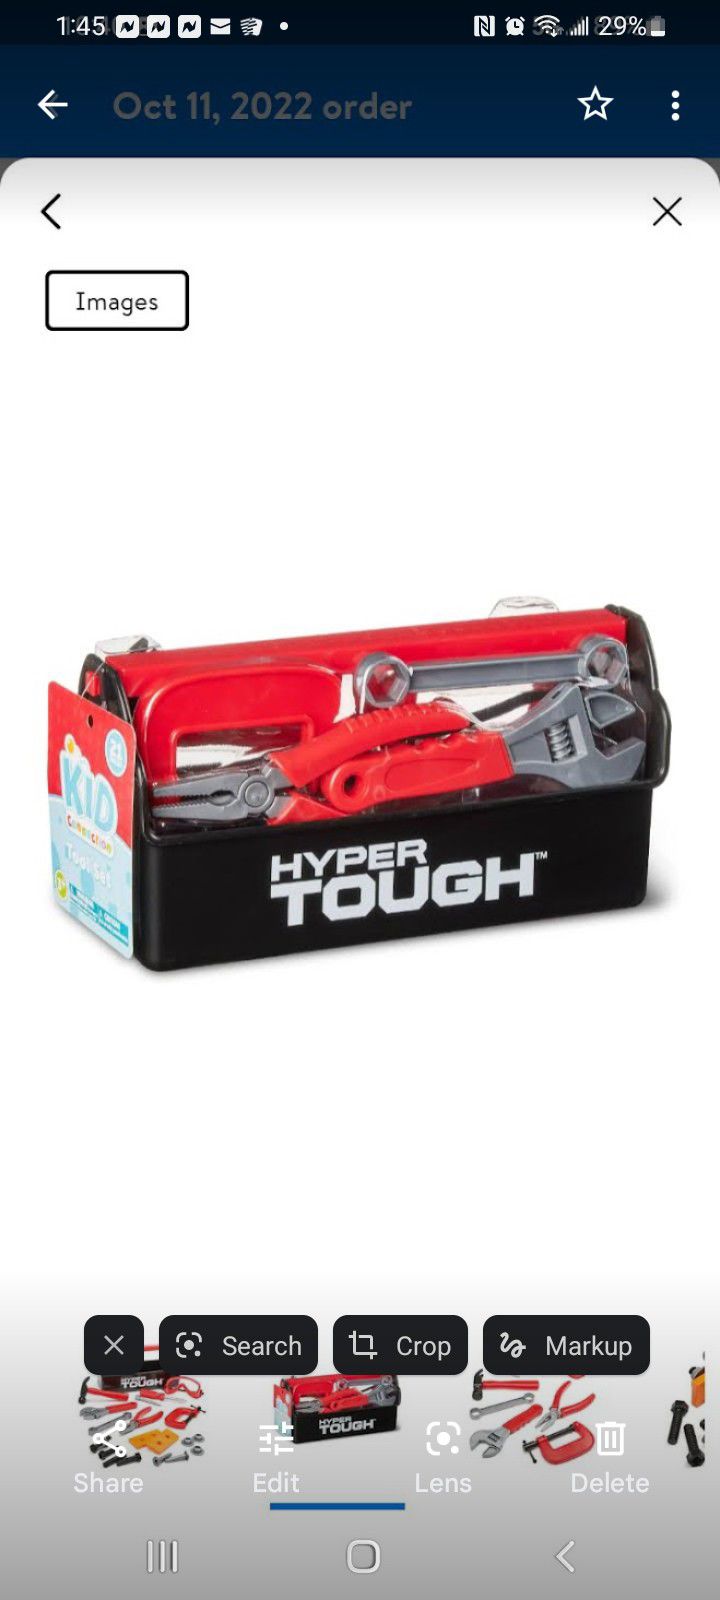 Hyper Tough Tool Box With Tools For Kids. 